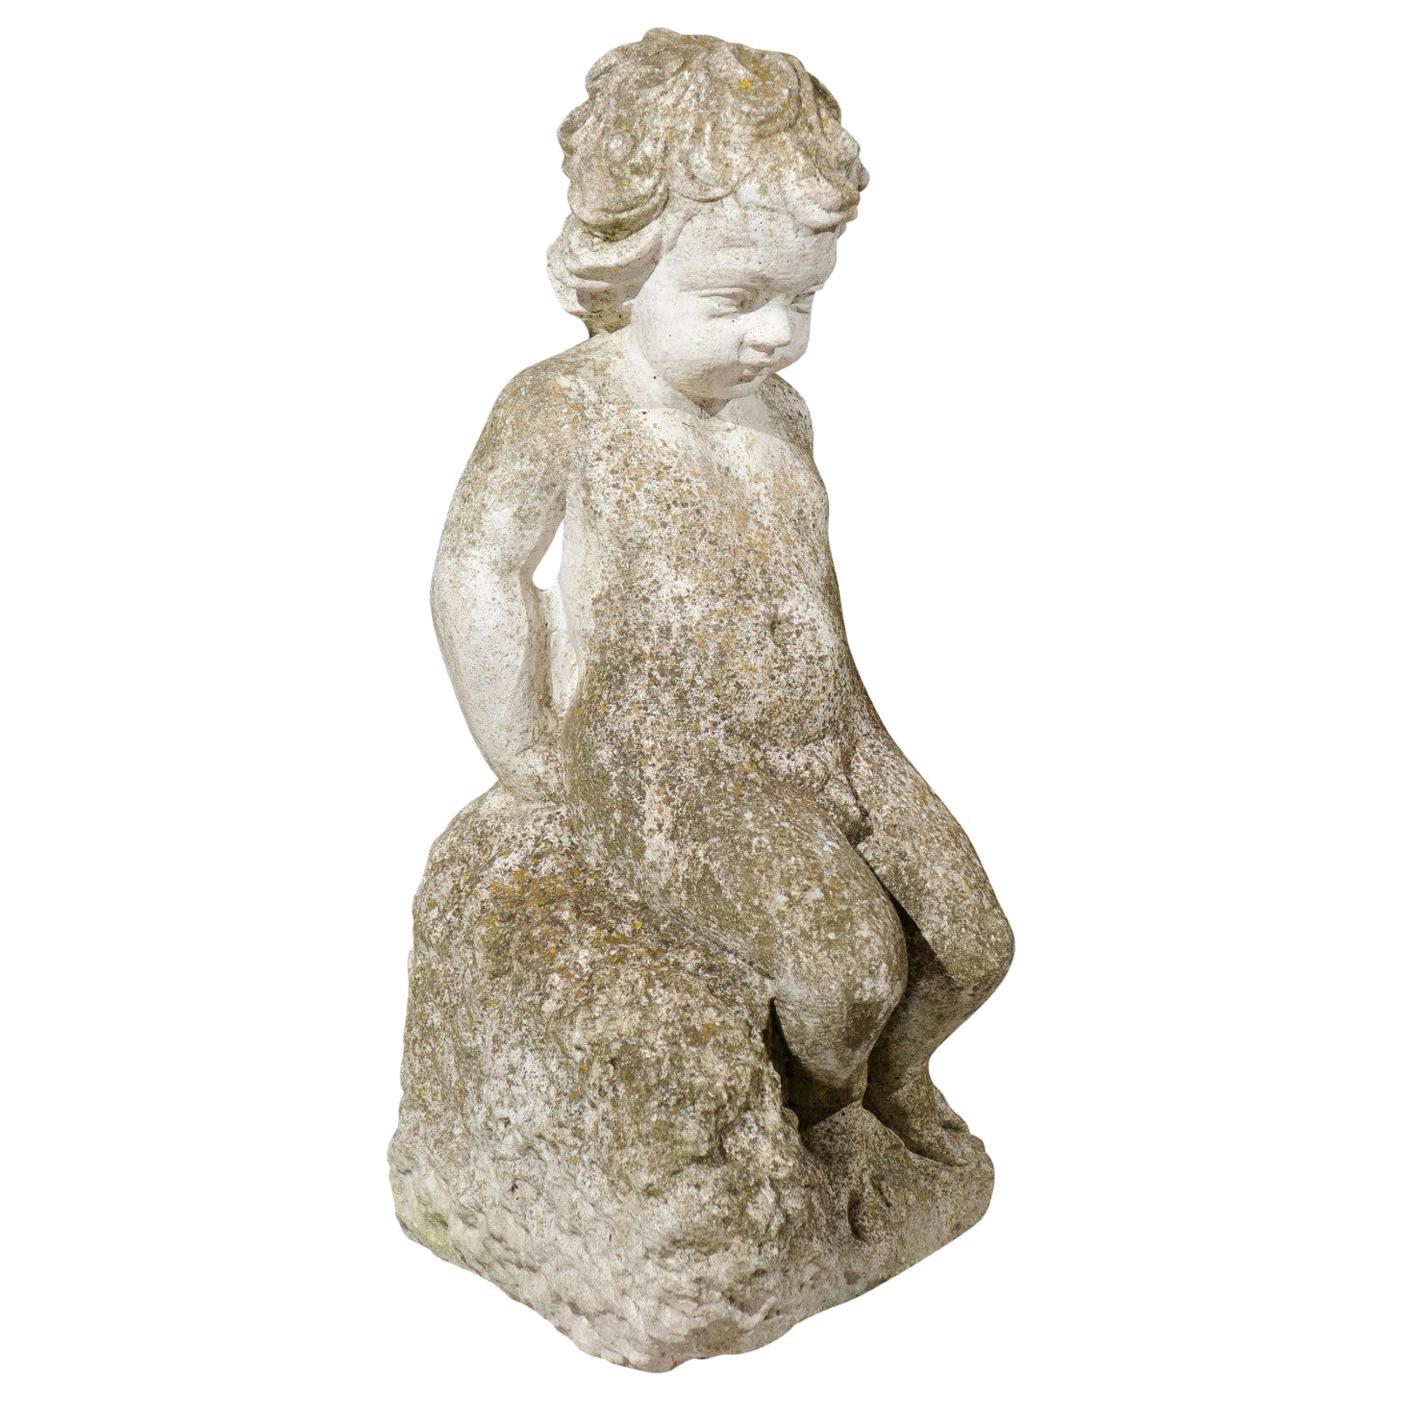 Swedish Carved Stone Garden Sculpture of a Putto Sitting on a Rock, 20th Century For Sale